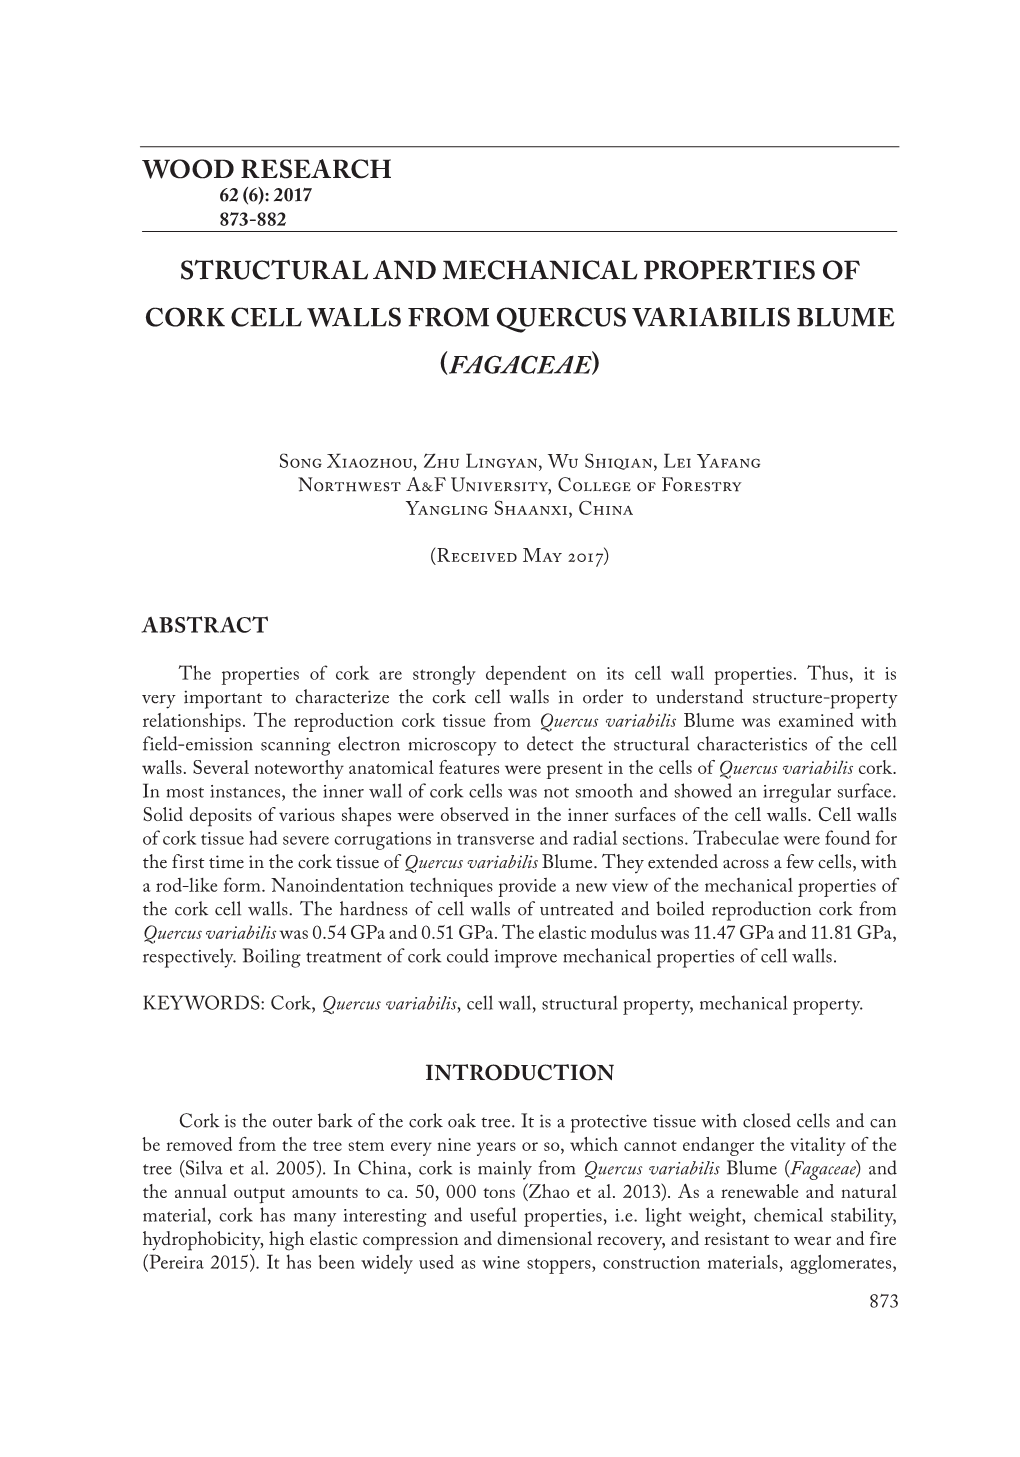 Wood Research Structural and Mechanical Properties